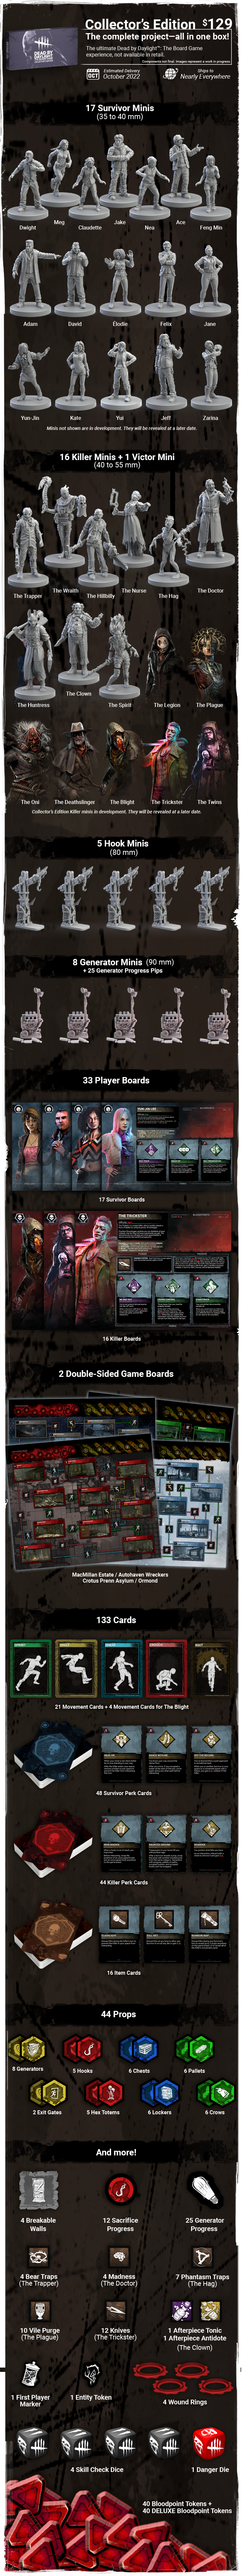 The Making of Dead by Daylight™: The Board Game (Part 7: Making Surviv –  Level 99 Store